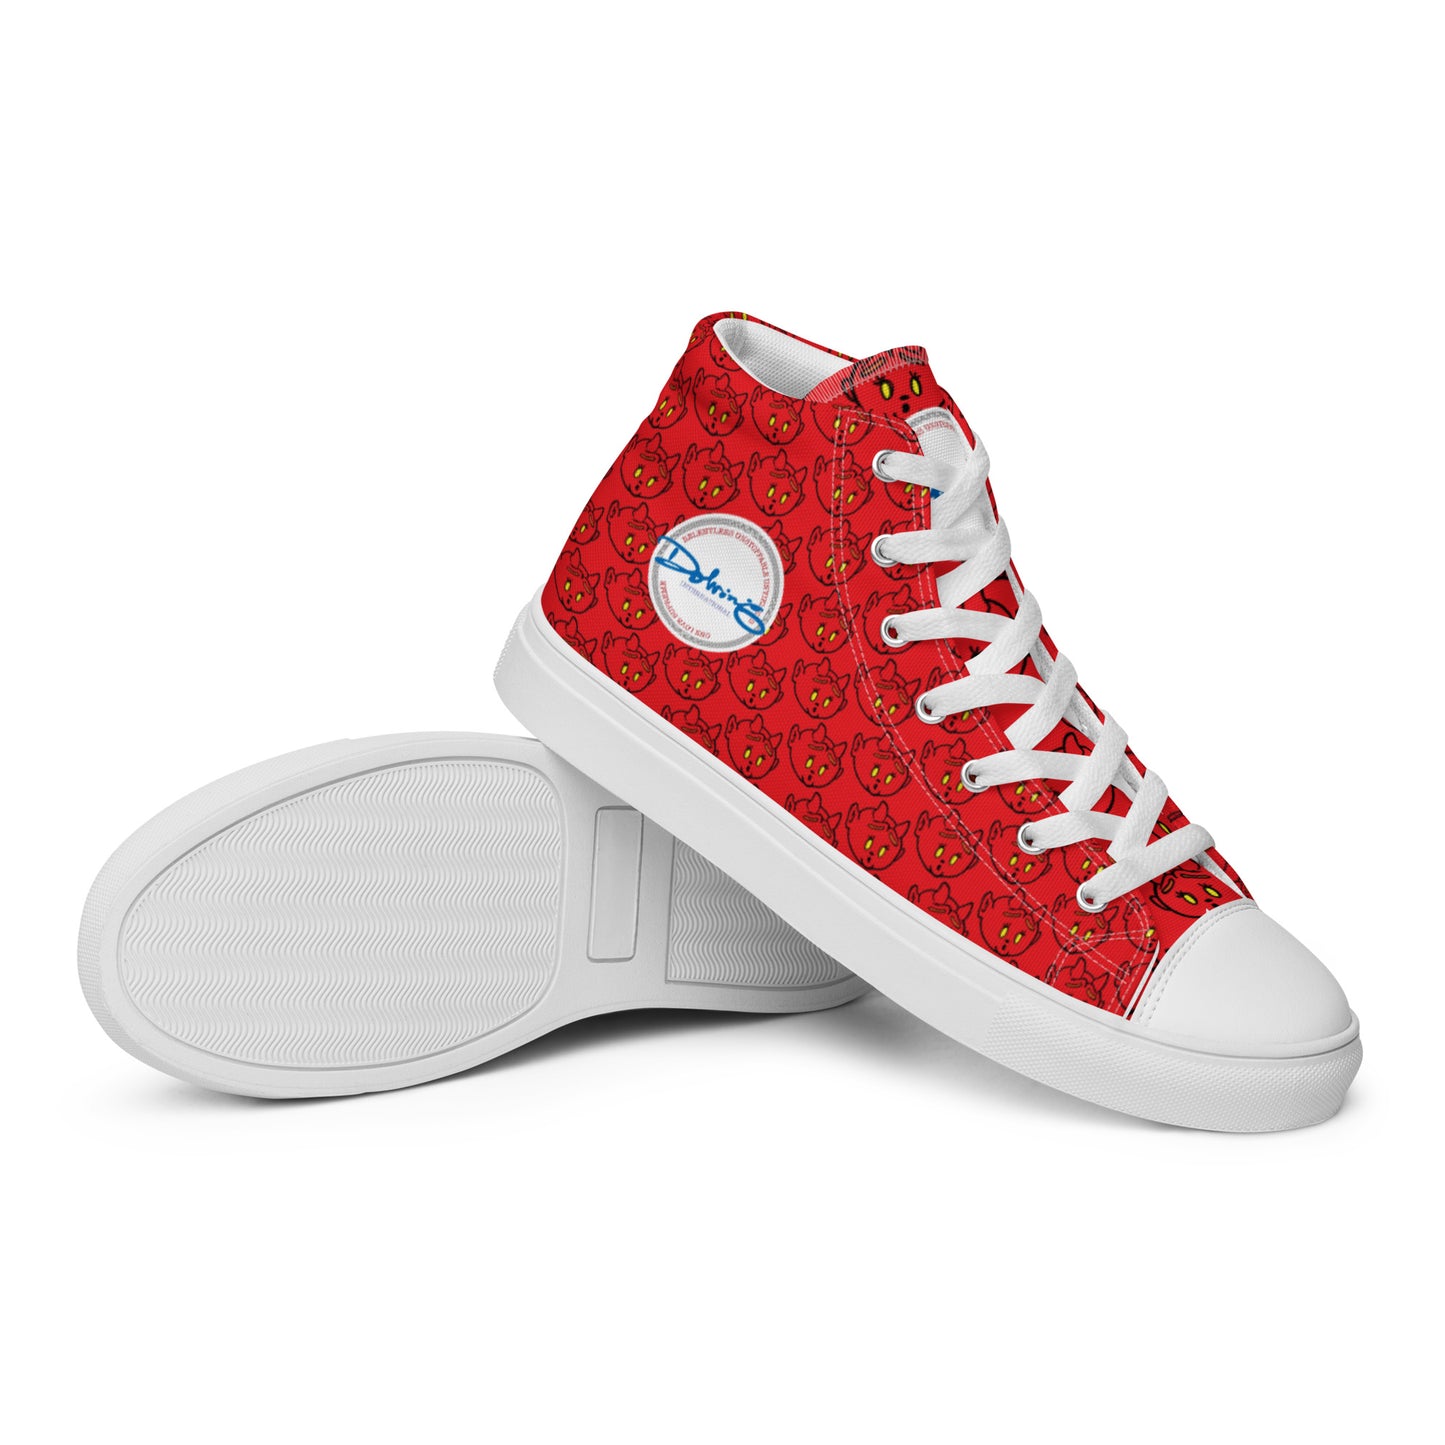 LIL DEMONS by DOLVING - Men’s high top canvas shoes